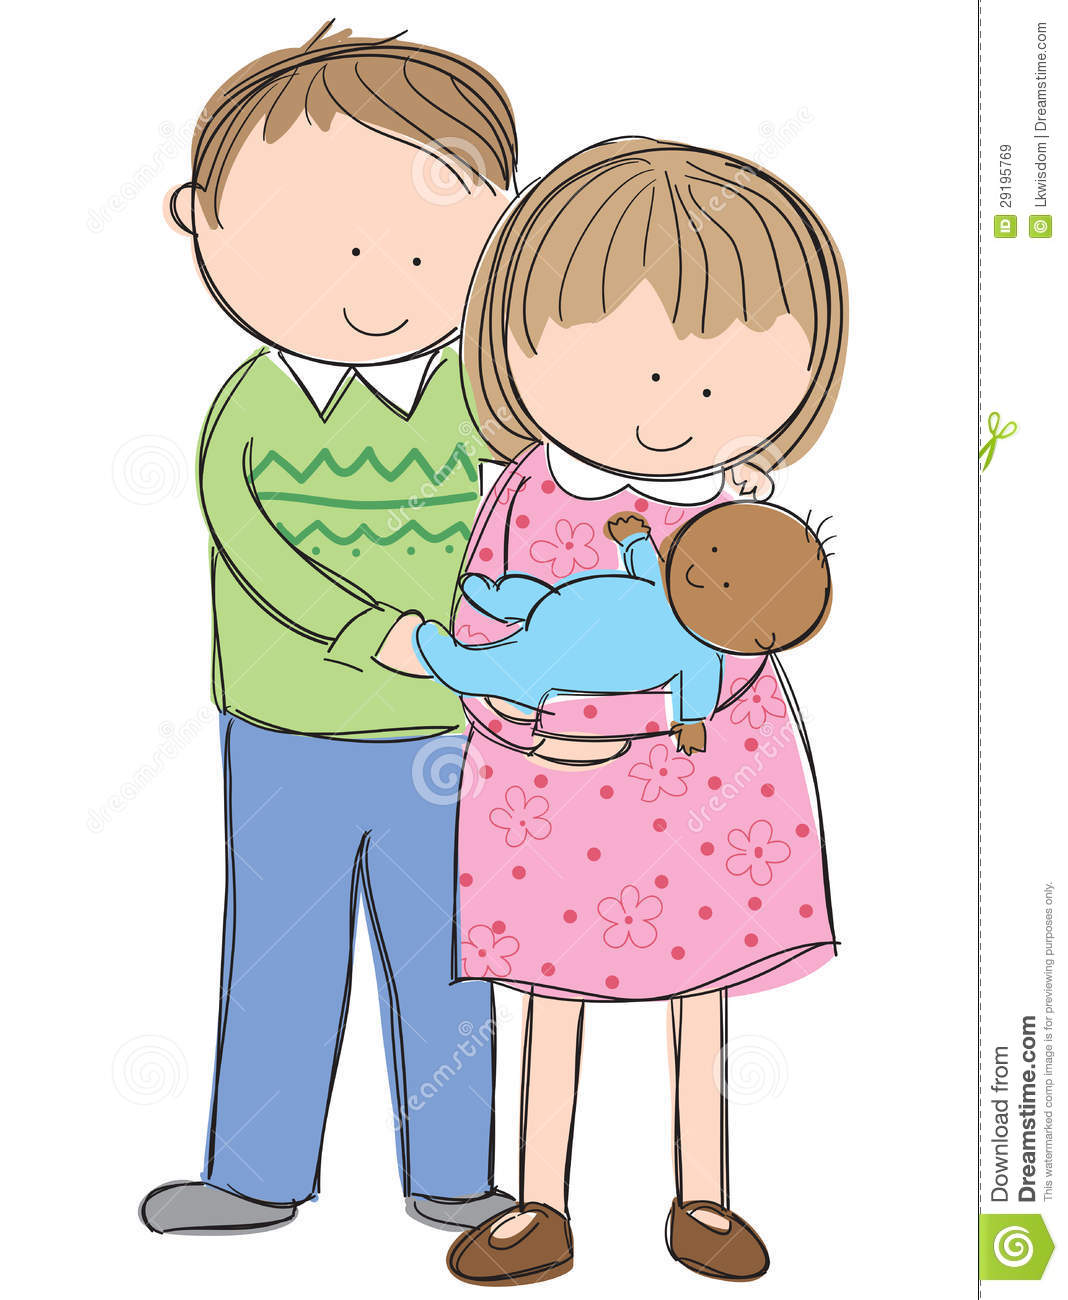 Hand Drawn Picture Of New Parents Holding Adopted Child Illustrated